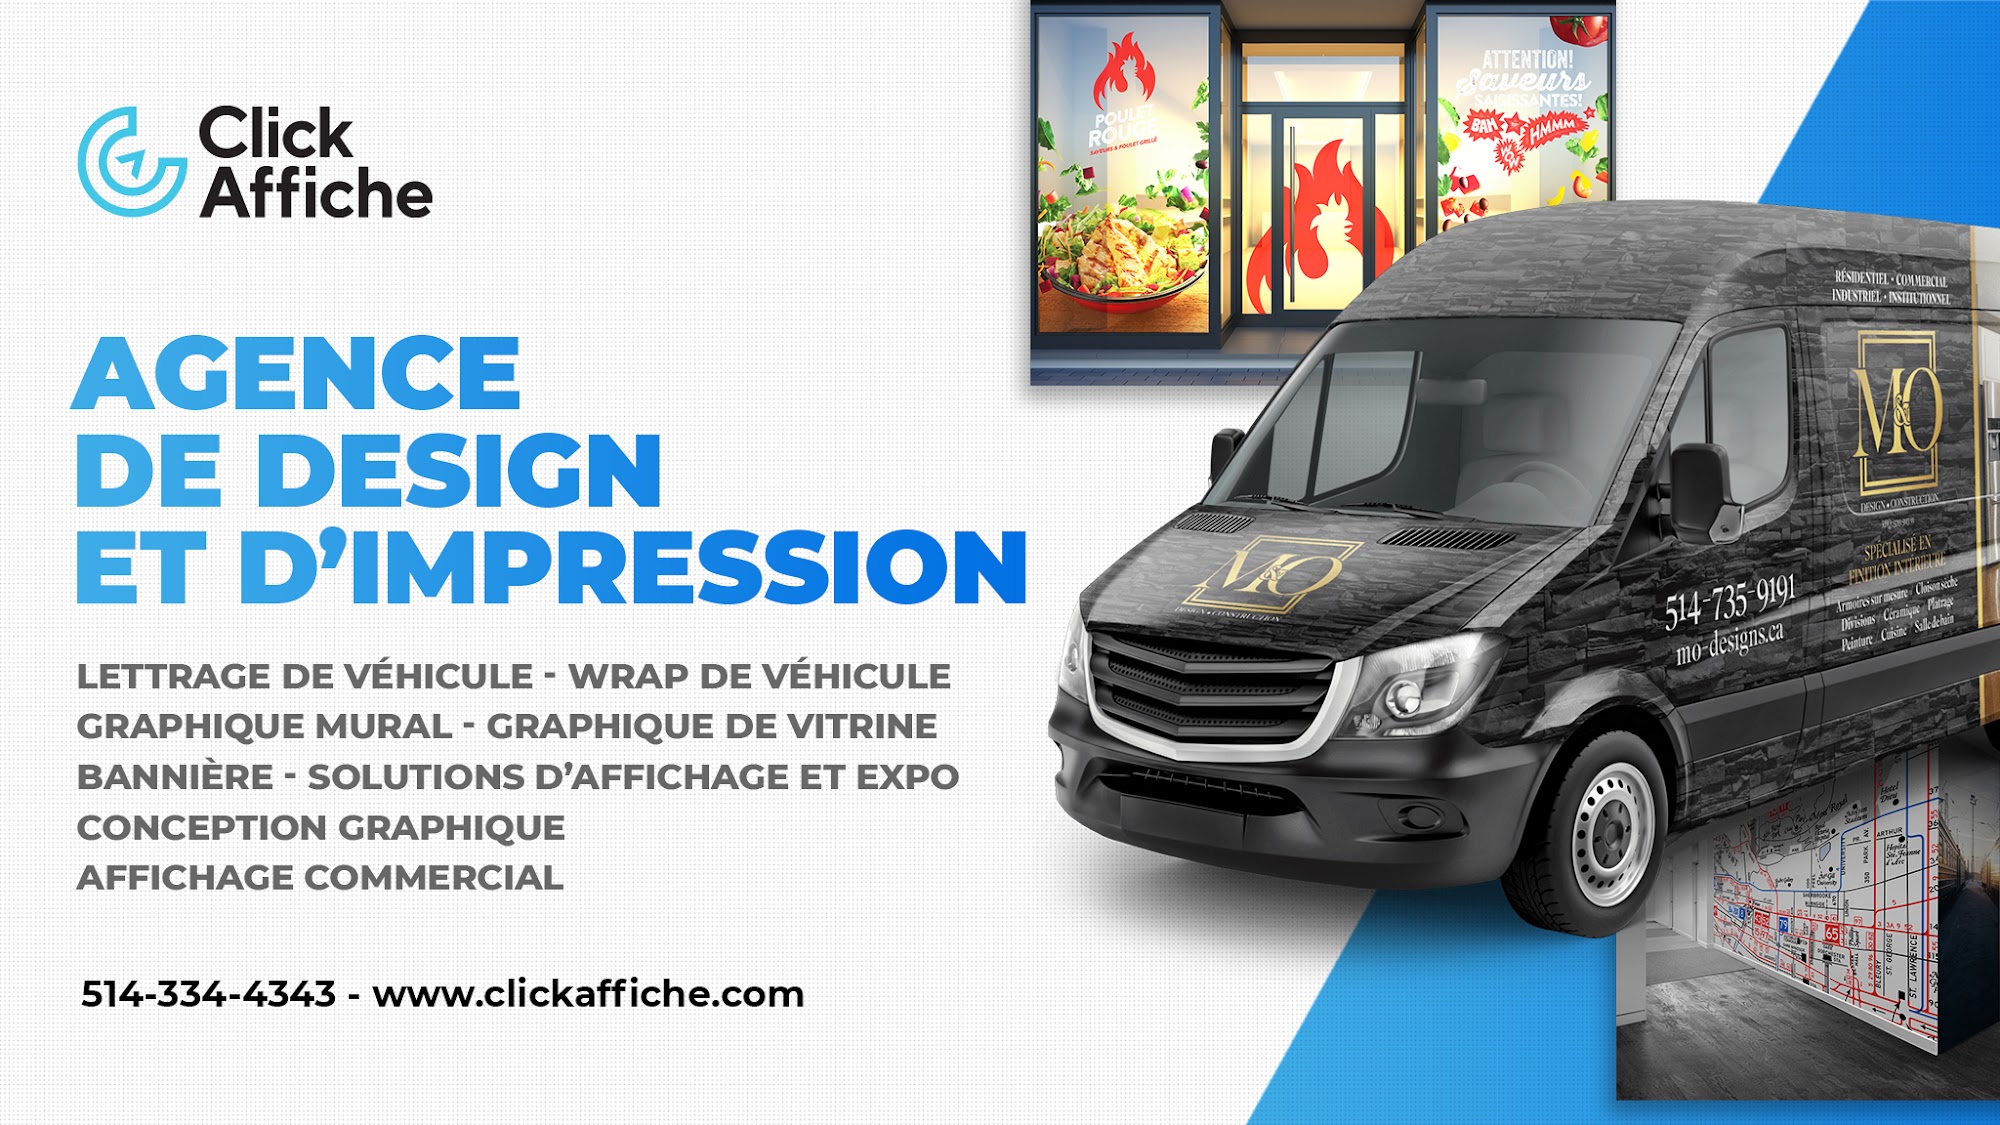 Click Affiche Inc. - Vehicle Wrap and Large Format Printing